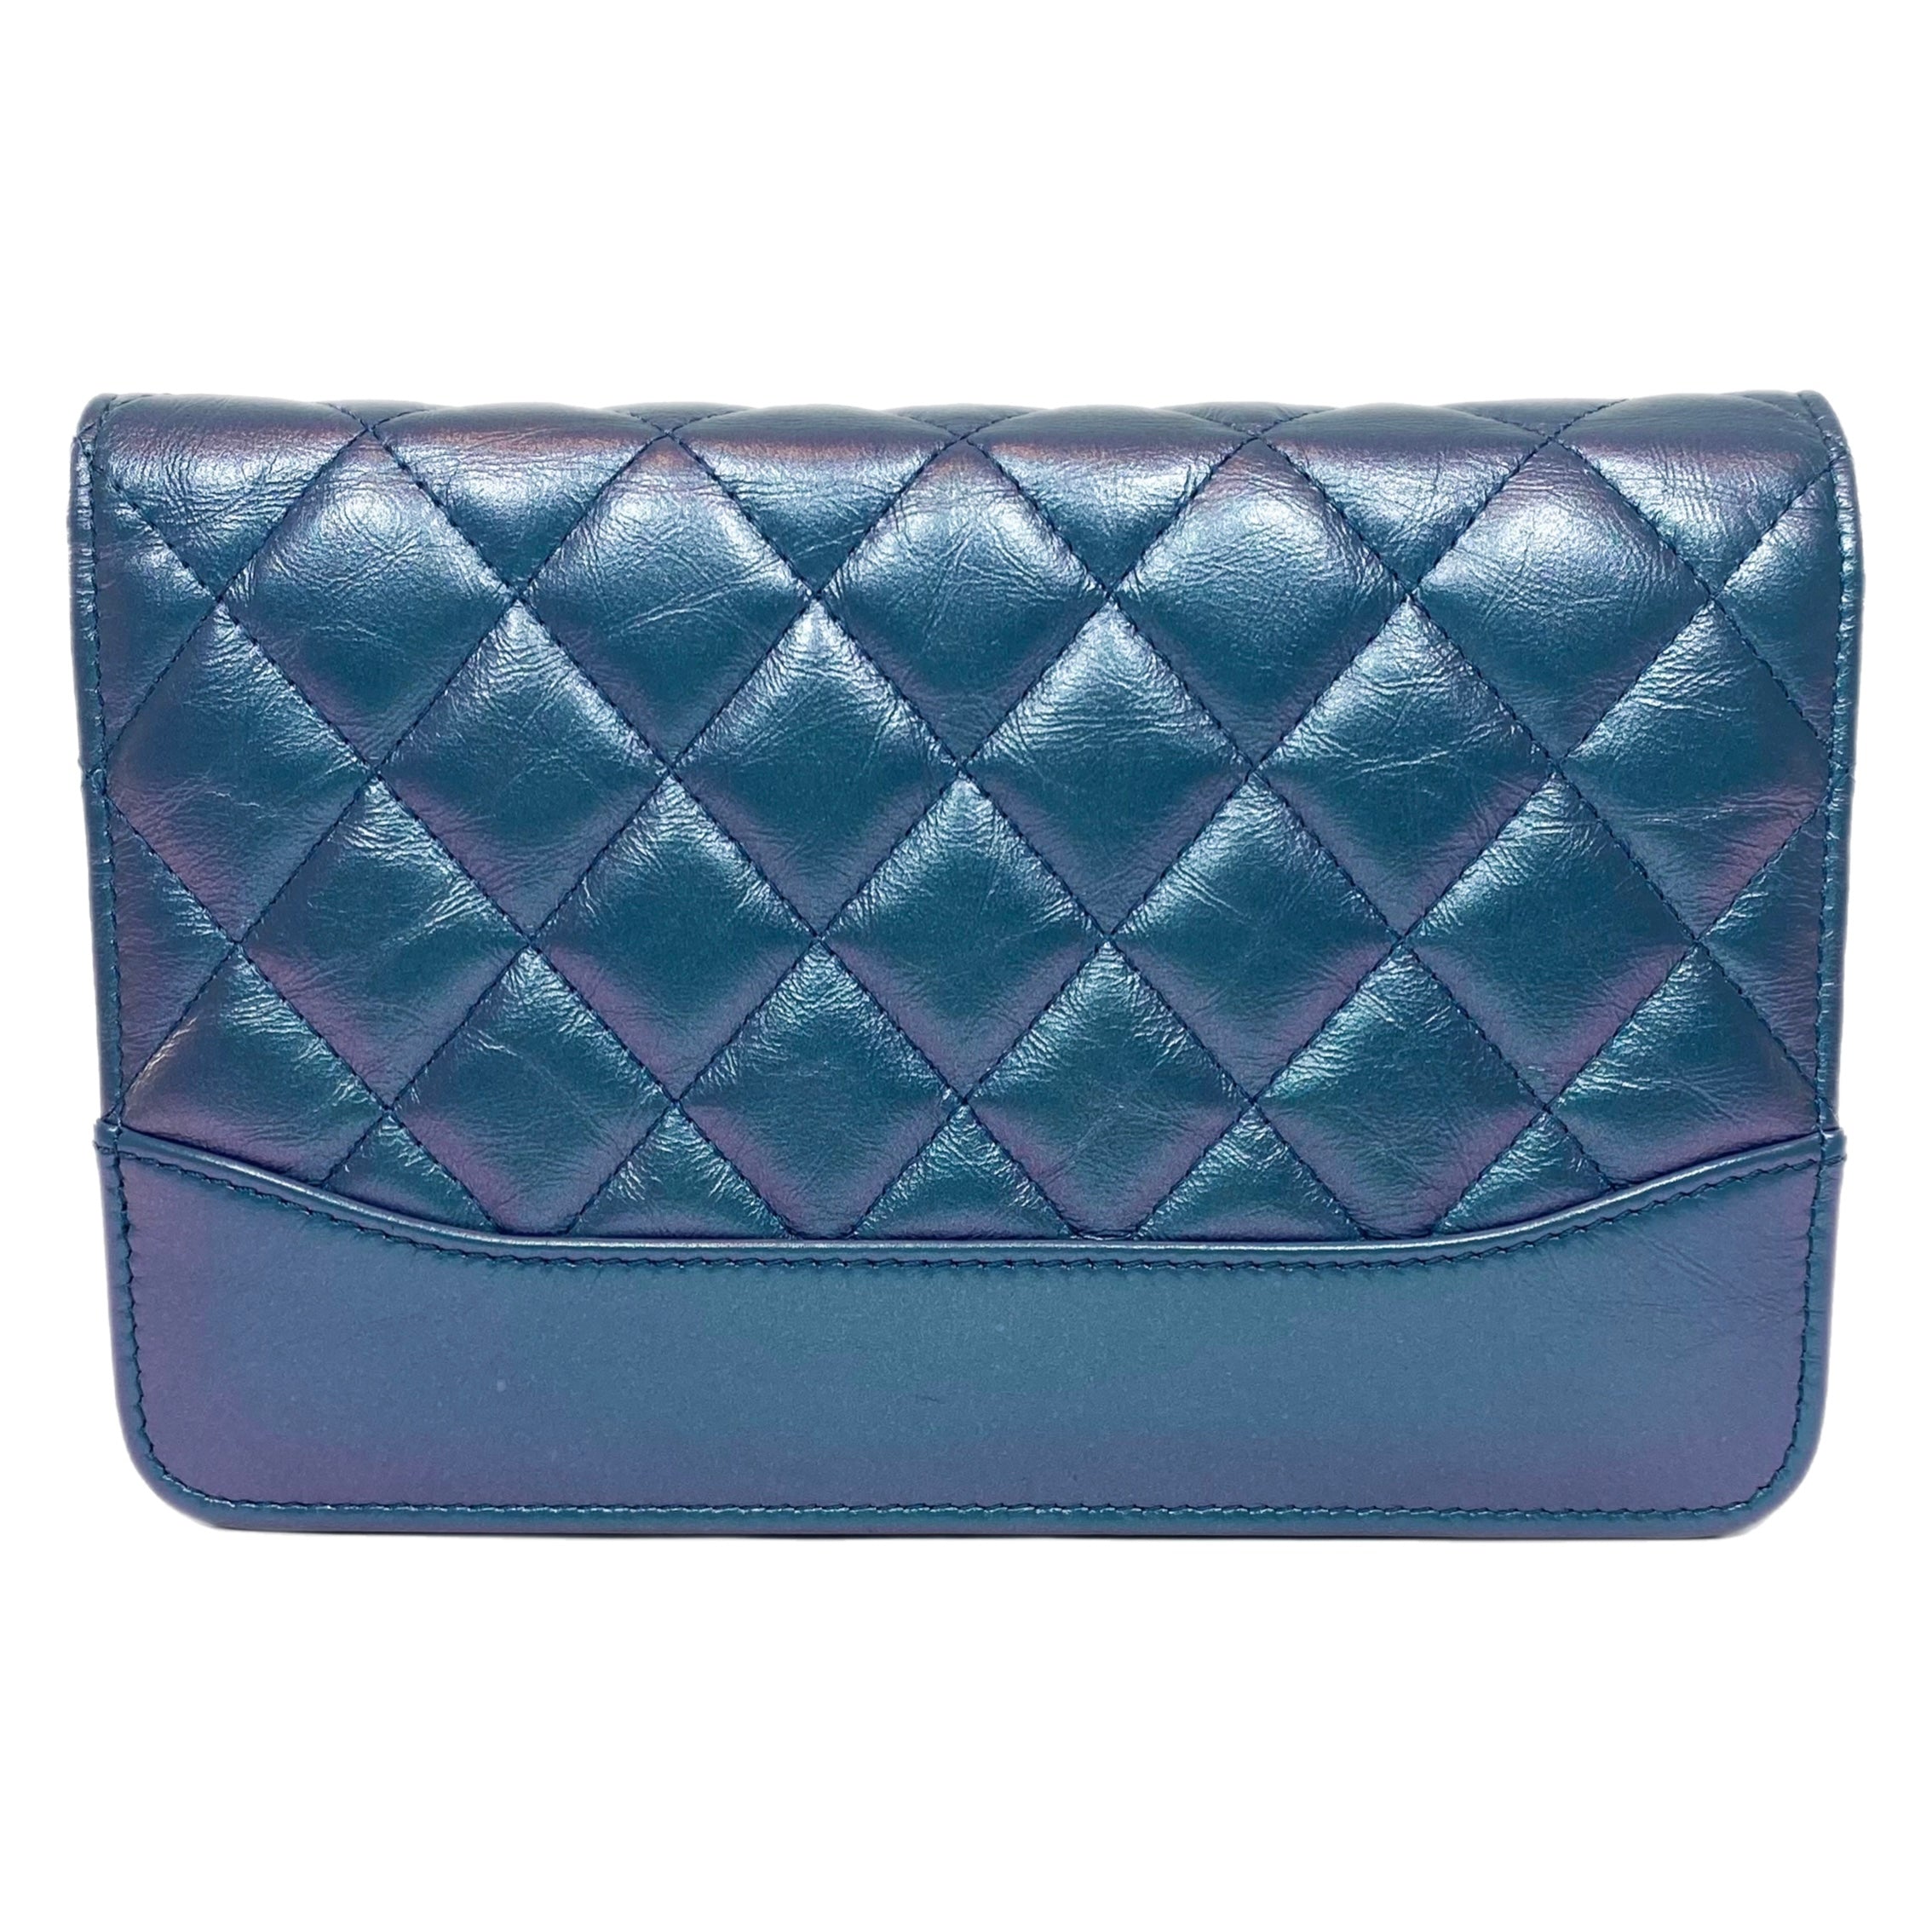 Chanel Iridescent Blue Quilted Calfskin Wallet On Chain